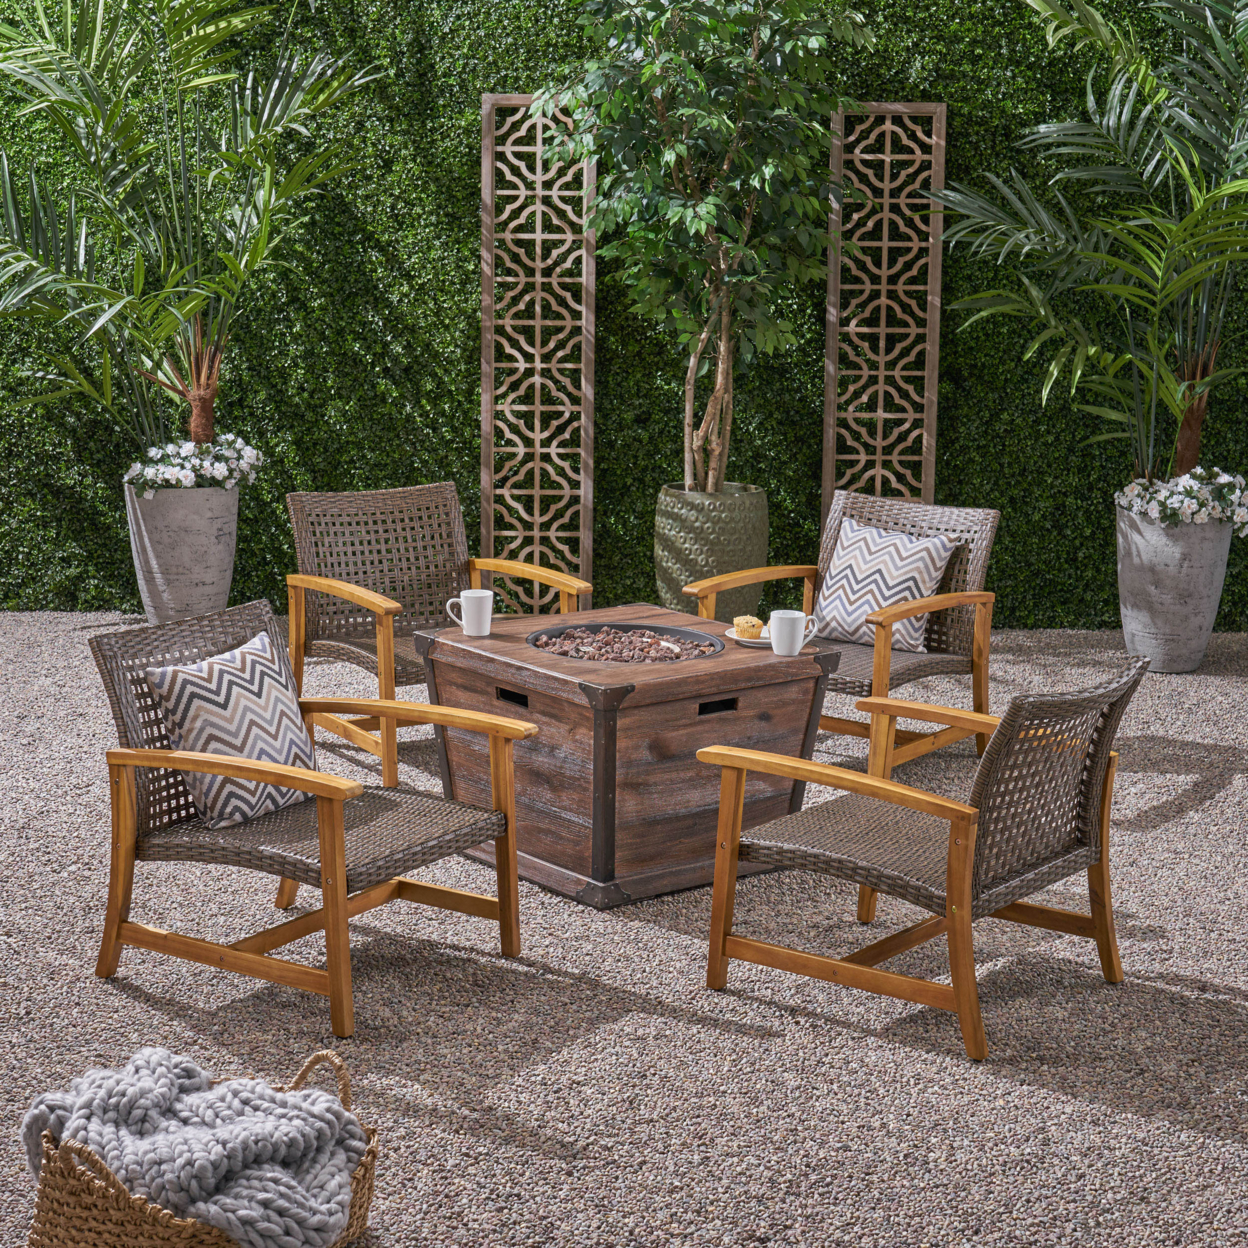 Levant Outdoor 4 Piece Wood And Wicker Club Chair Set With Fire Pit - Light Gray / Mixed Black